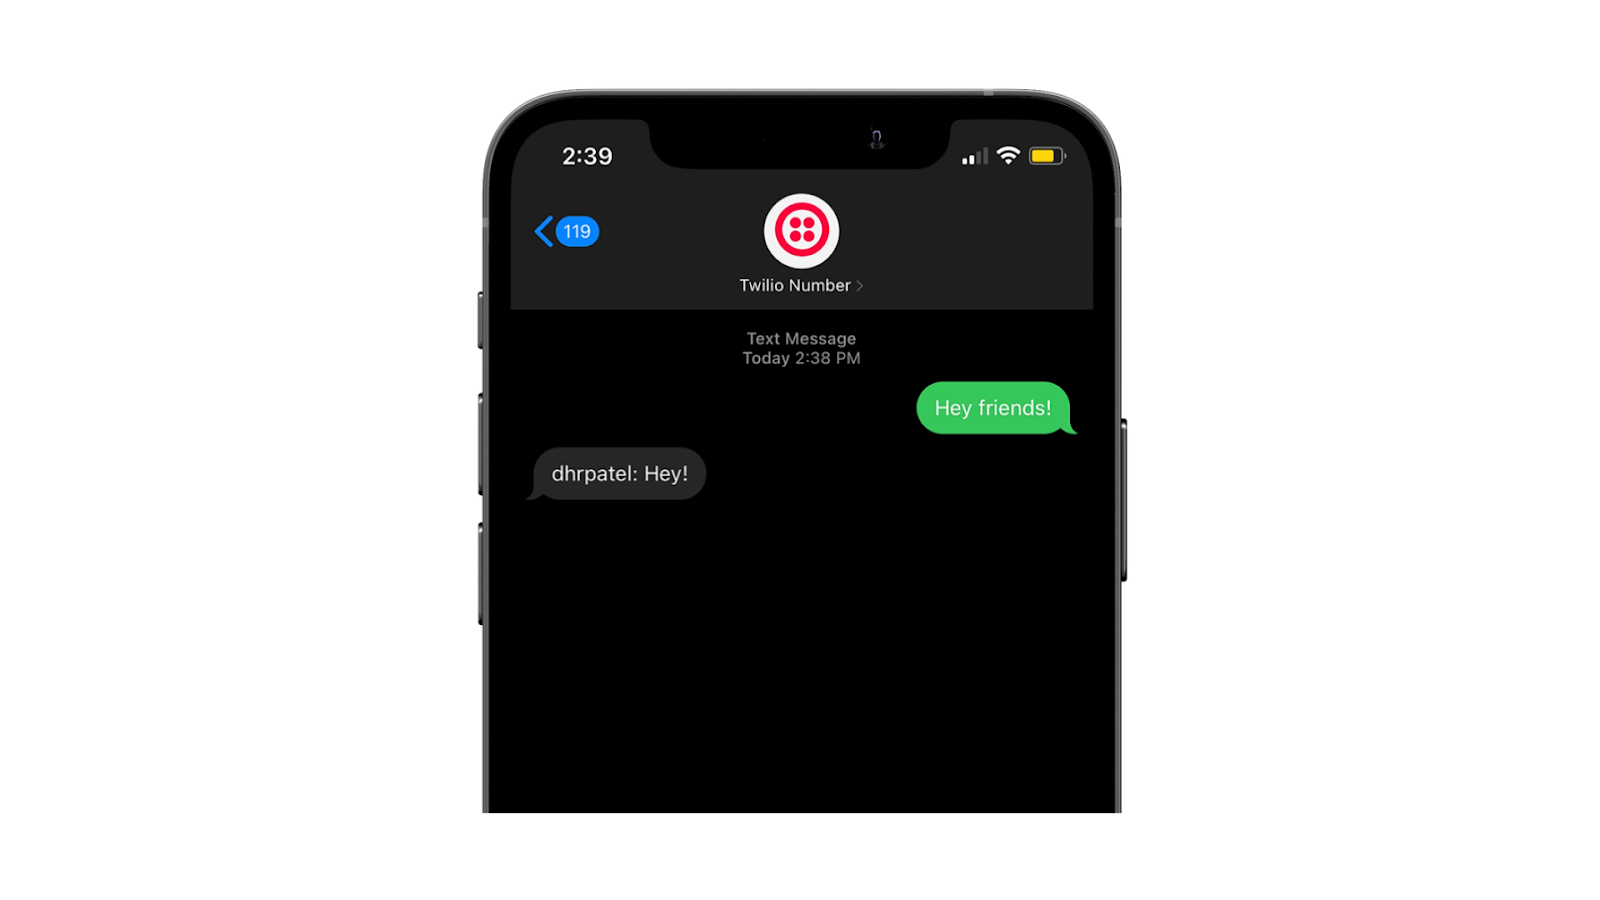 Phone screenshot of SMS from twilio number saying, "dhrpatel: Hey!"".